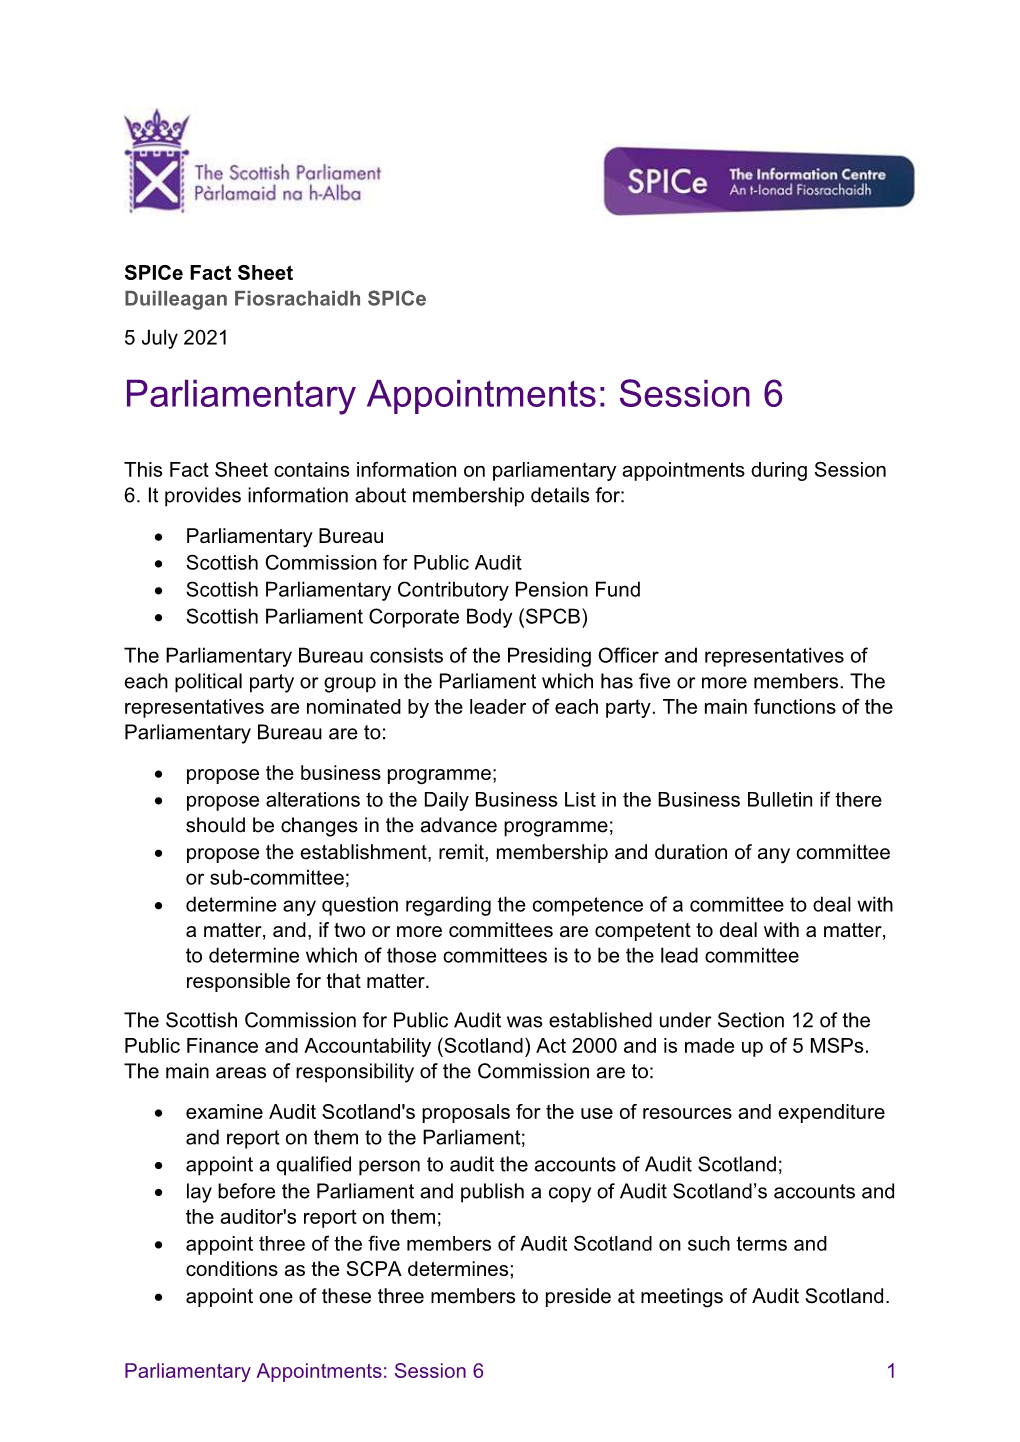 Parliamentary Appointments: Session 6